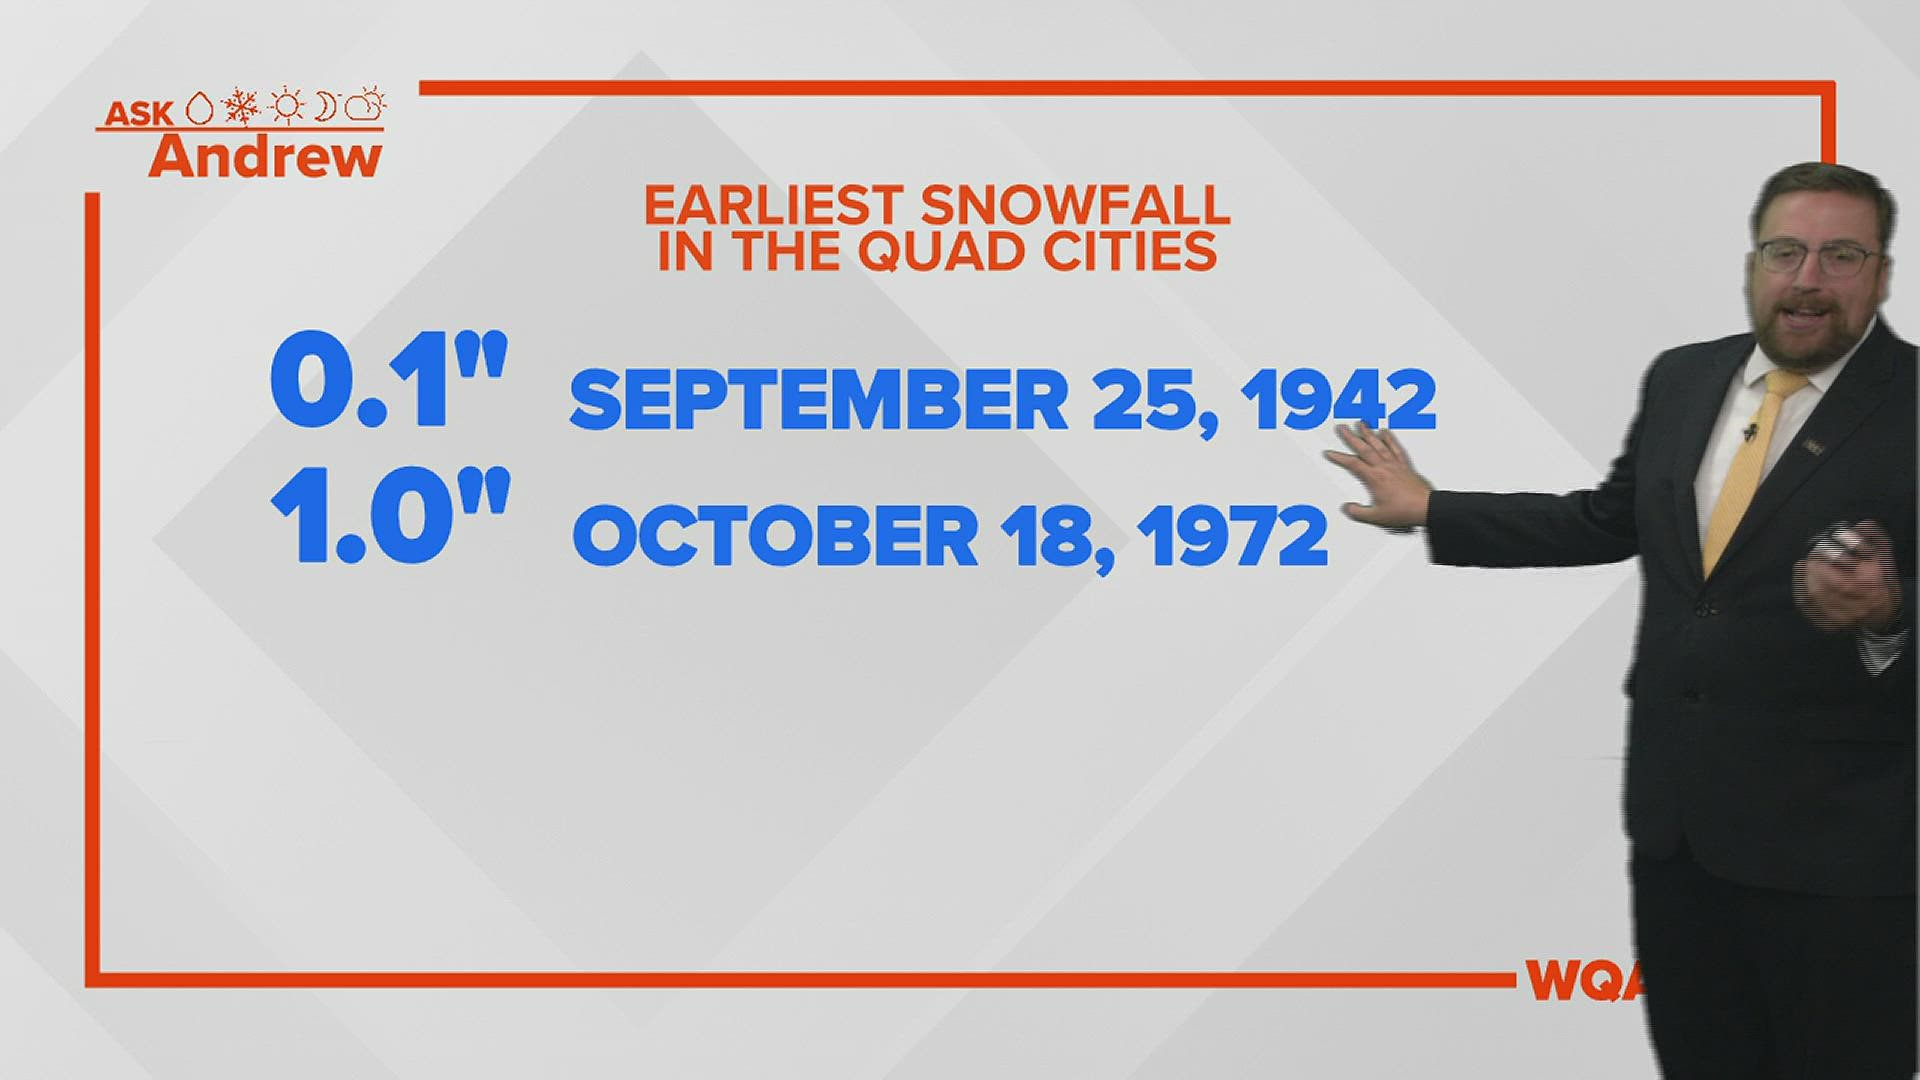 Snow has been observed as early as September in the Quad Cities.